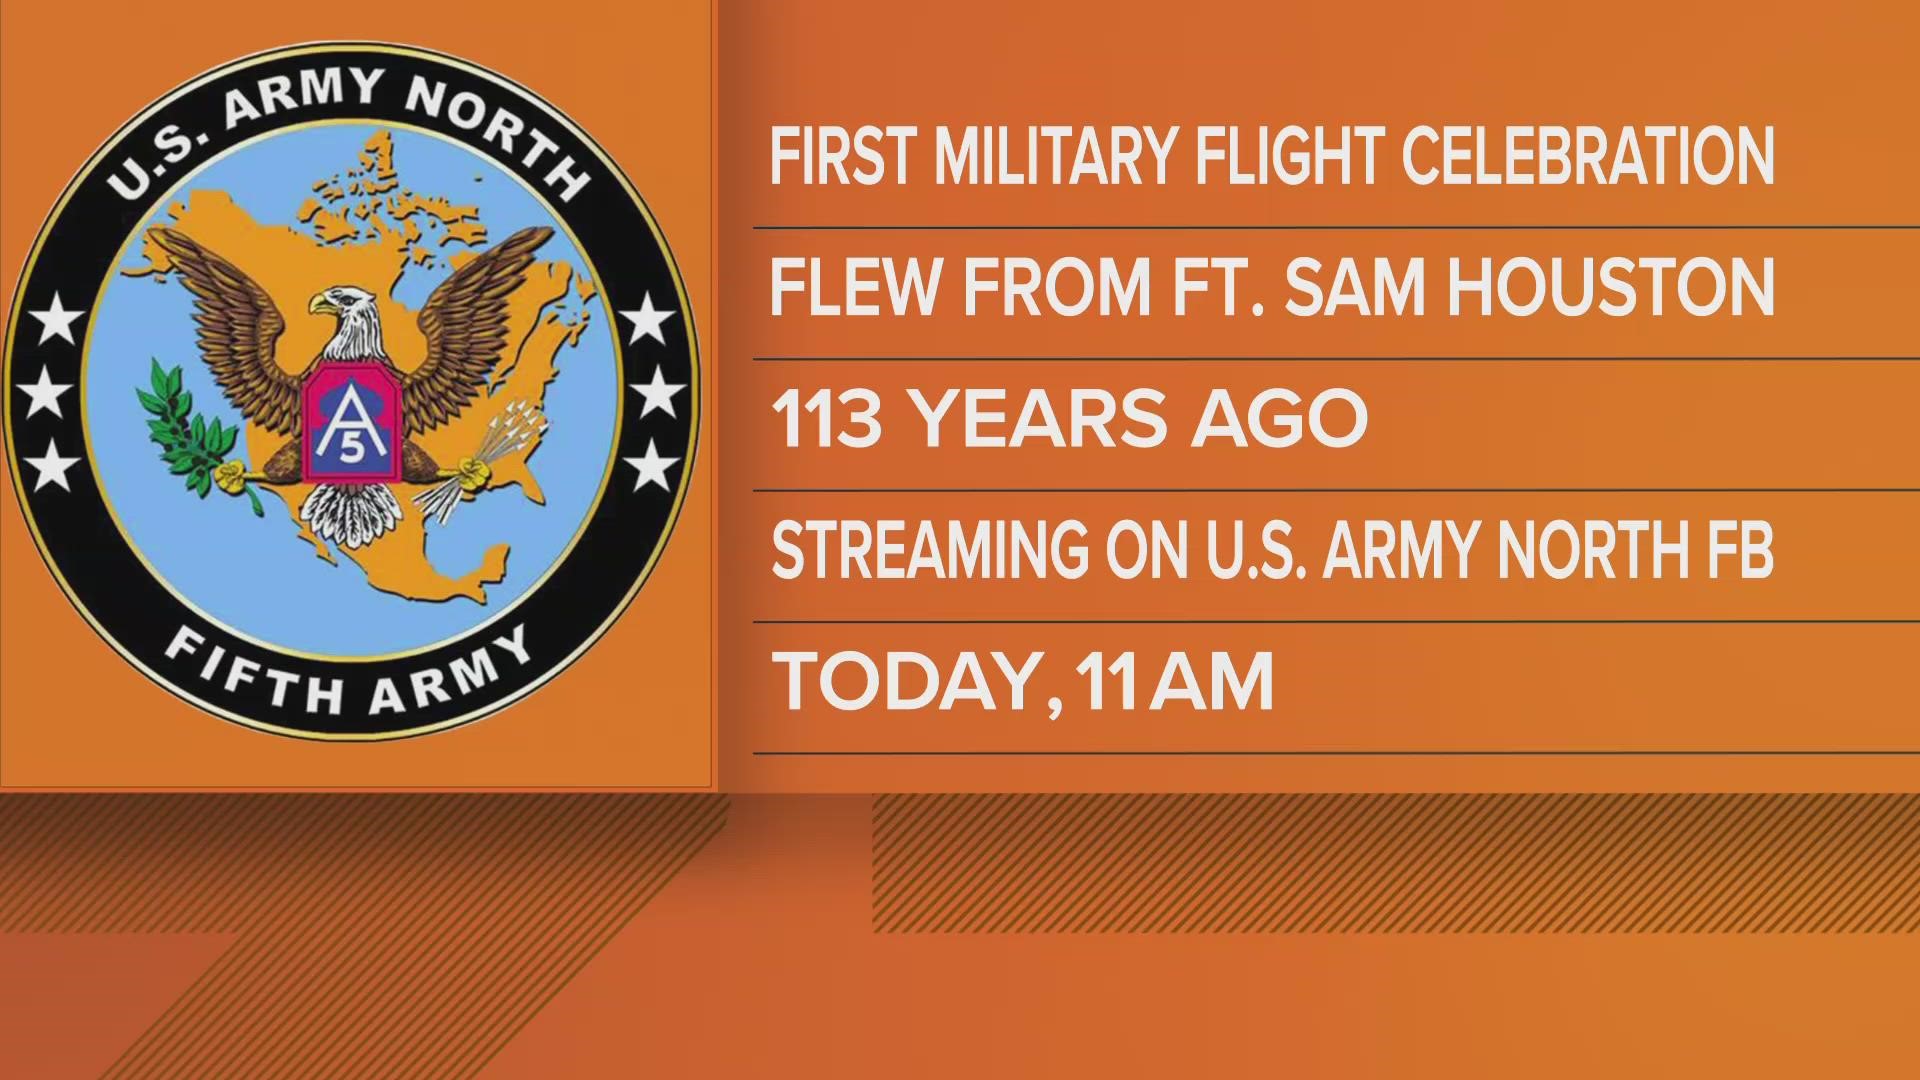 This year marks the 113th anniversary of the major achievement which happened here at Fort Sam Houston.